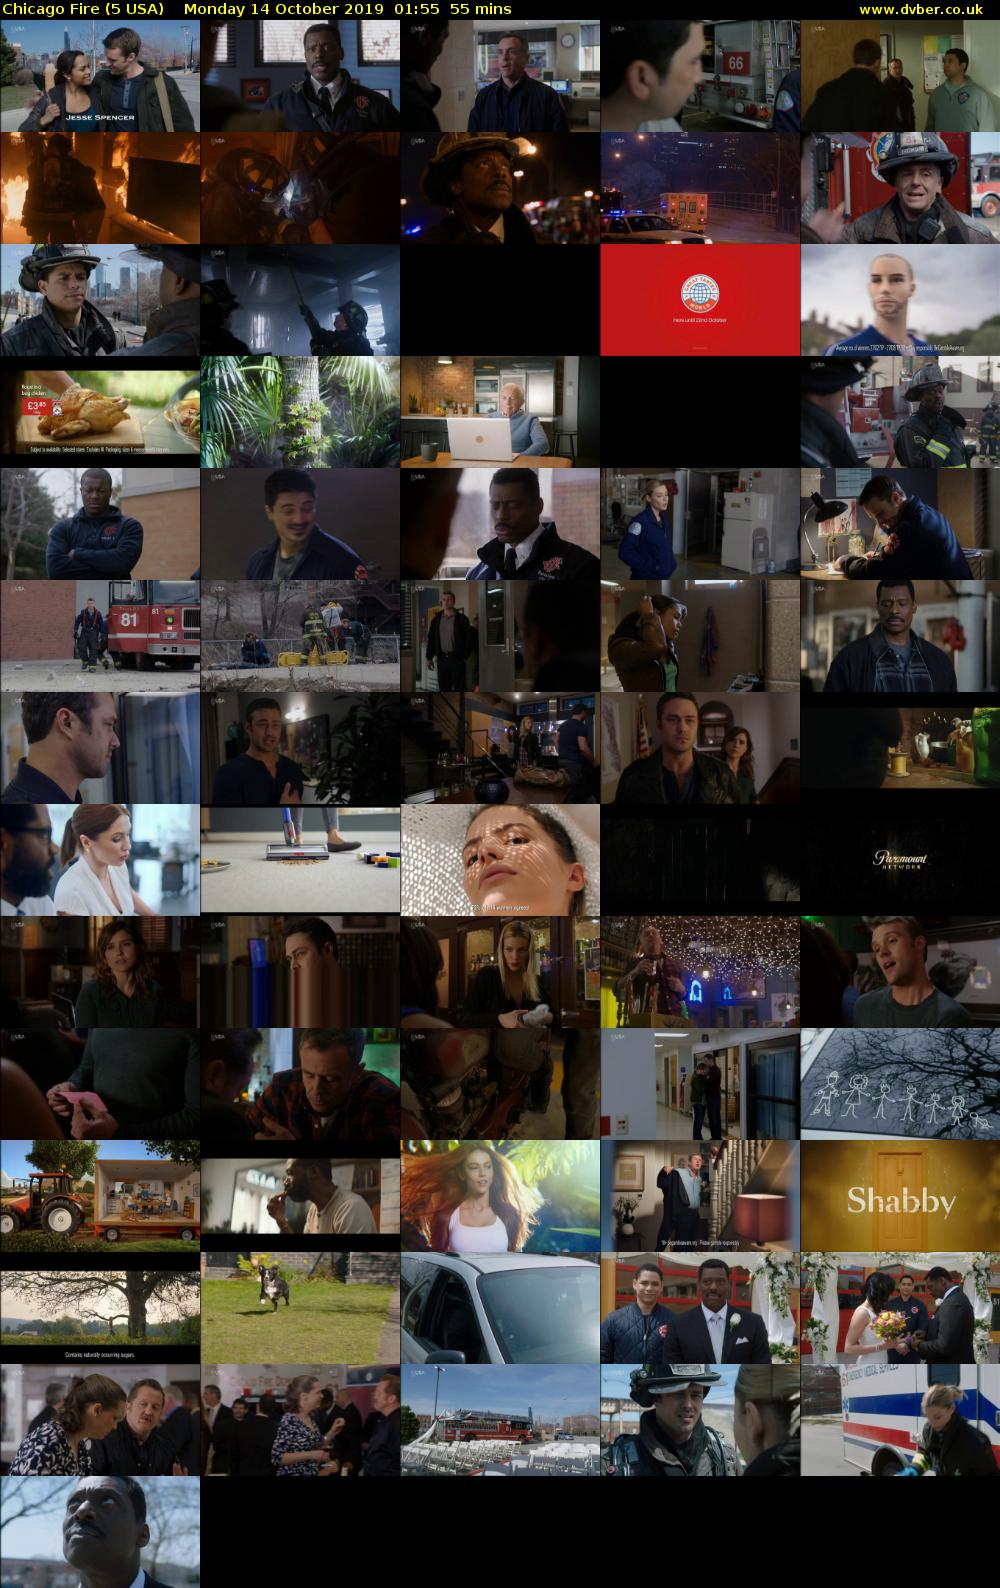 Chicago Fire (5 USA) Monday 14 October 2019 01:55 - 02:50